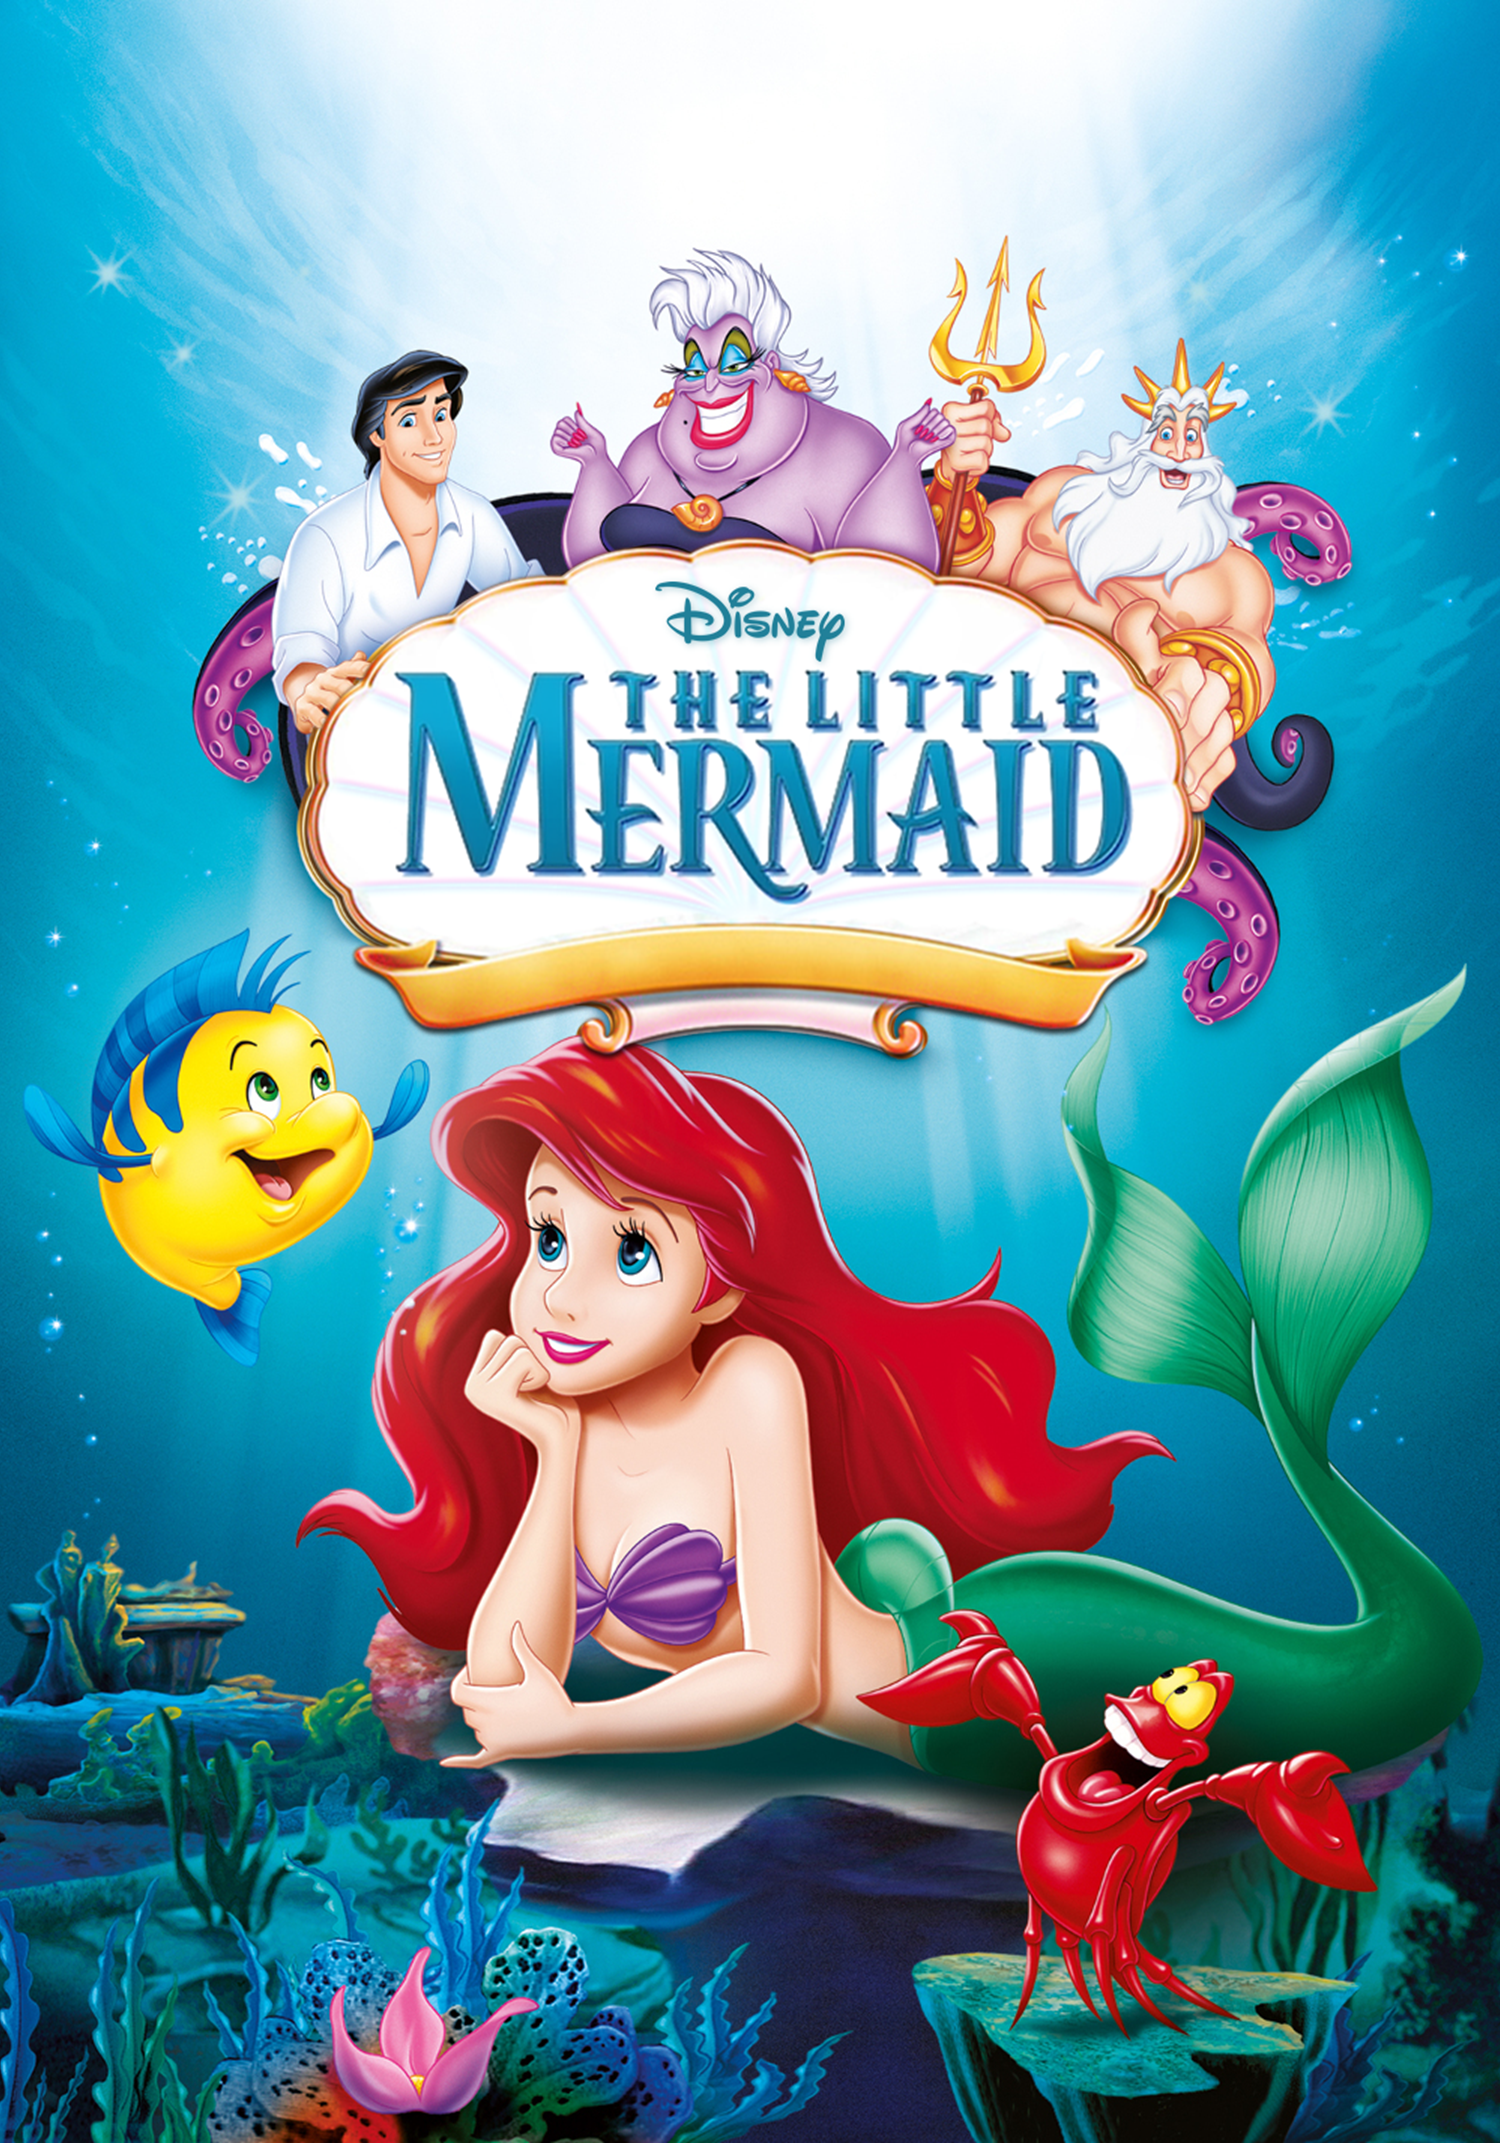 Imagen - The Little Mermaid - Poster.png | Wikia Cuentos ...